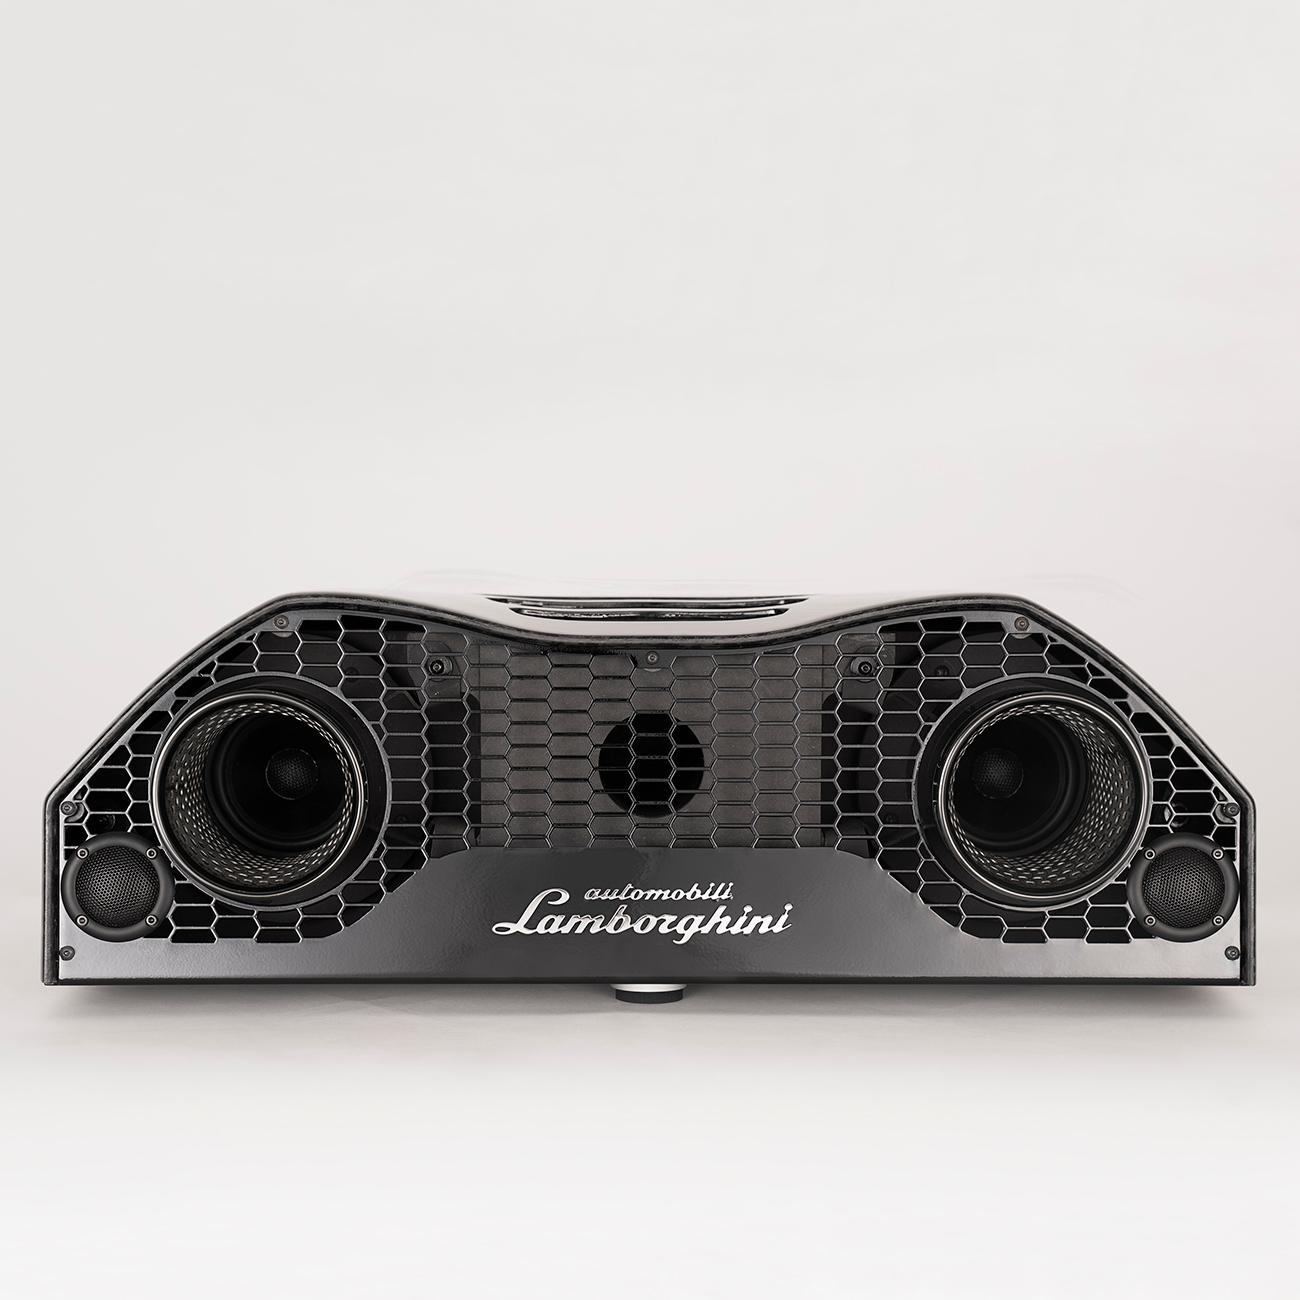 Speaker Lamborghini Carbon with all structure in polymerised carbon
in an autoclave at 6 bar, including an original Lamborghini exhaust pipes,
a bluetooth® 4.0 – aptX® decoding, a thermal protection, a stereo audio 
system on 110 V-240 V~50/60